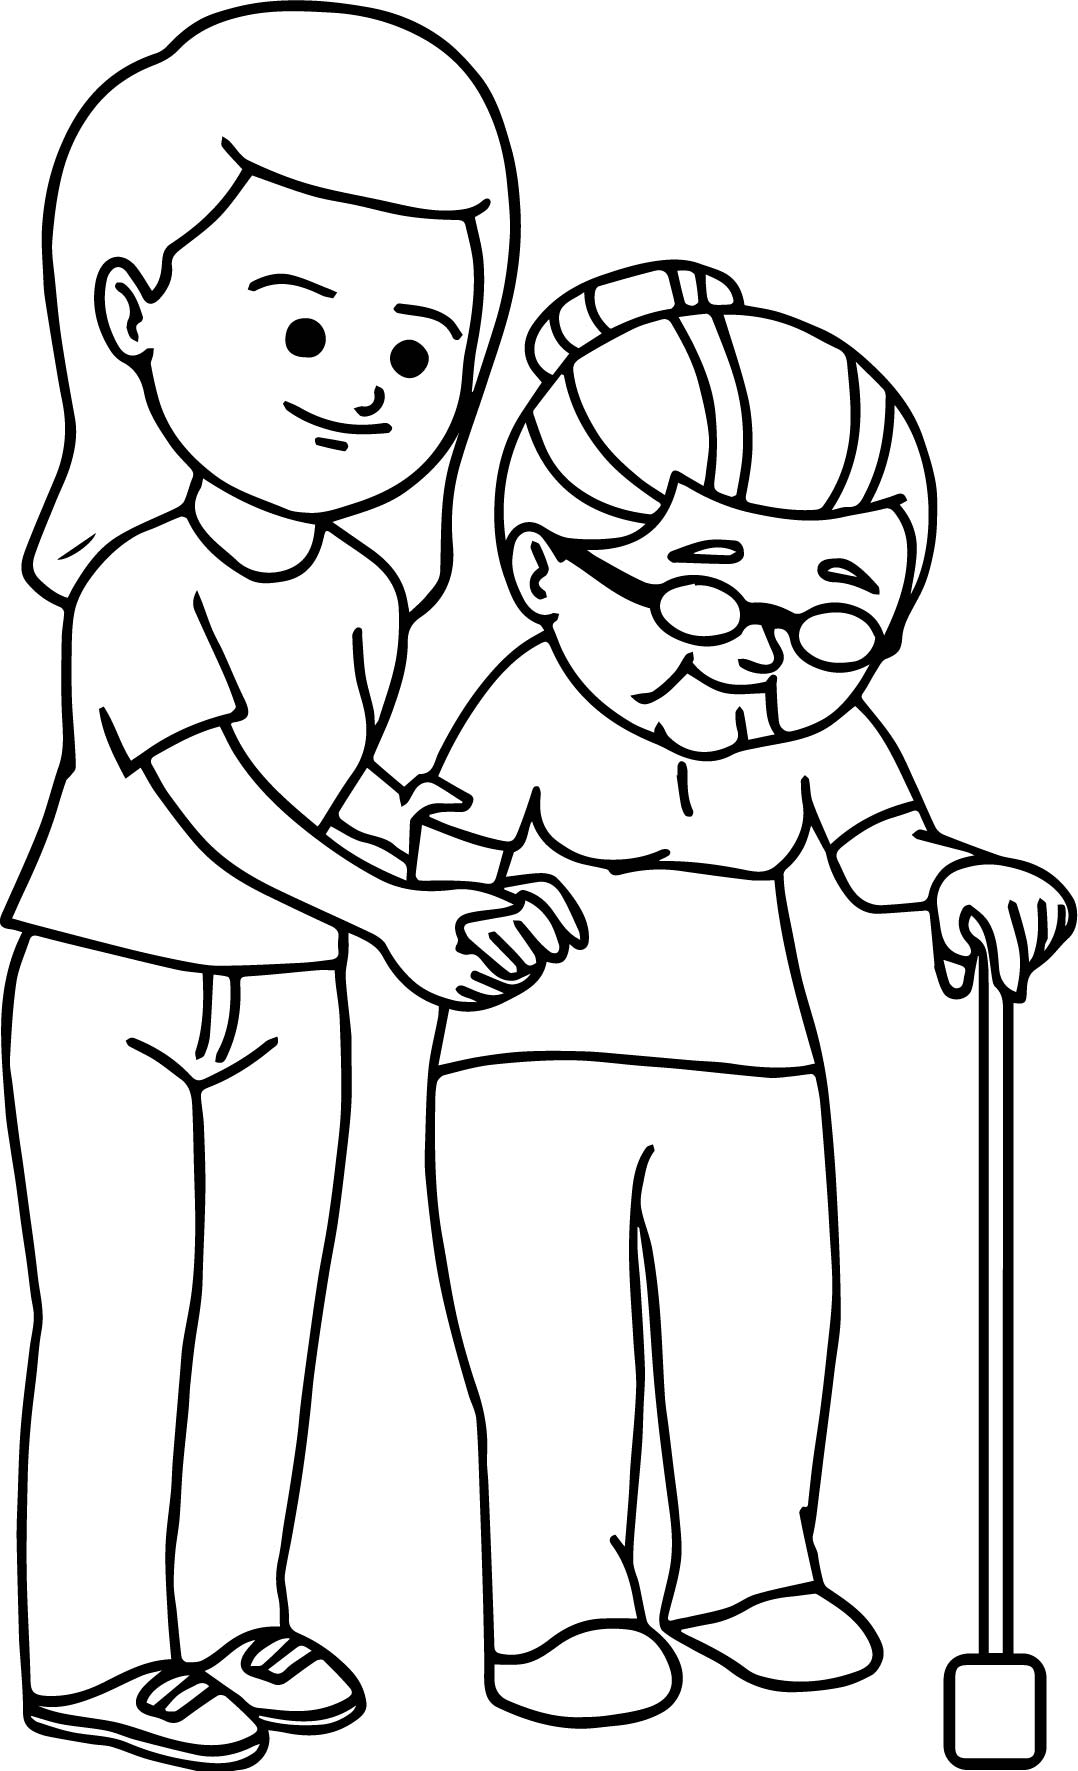 Download Kindness Coloring Pages - Best Coloring Pages For Kids